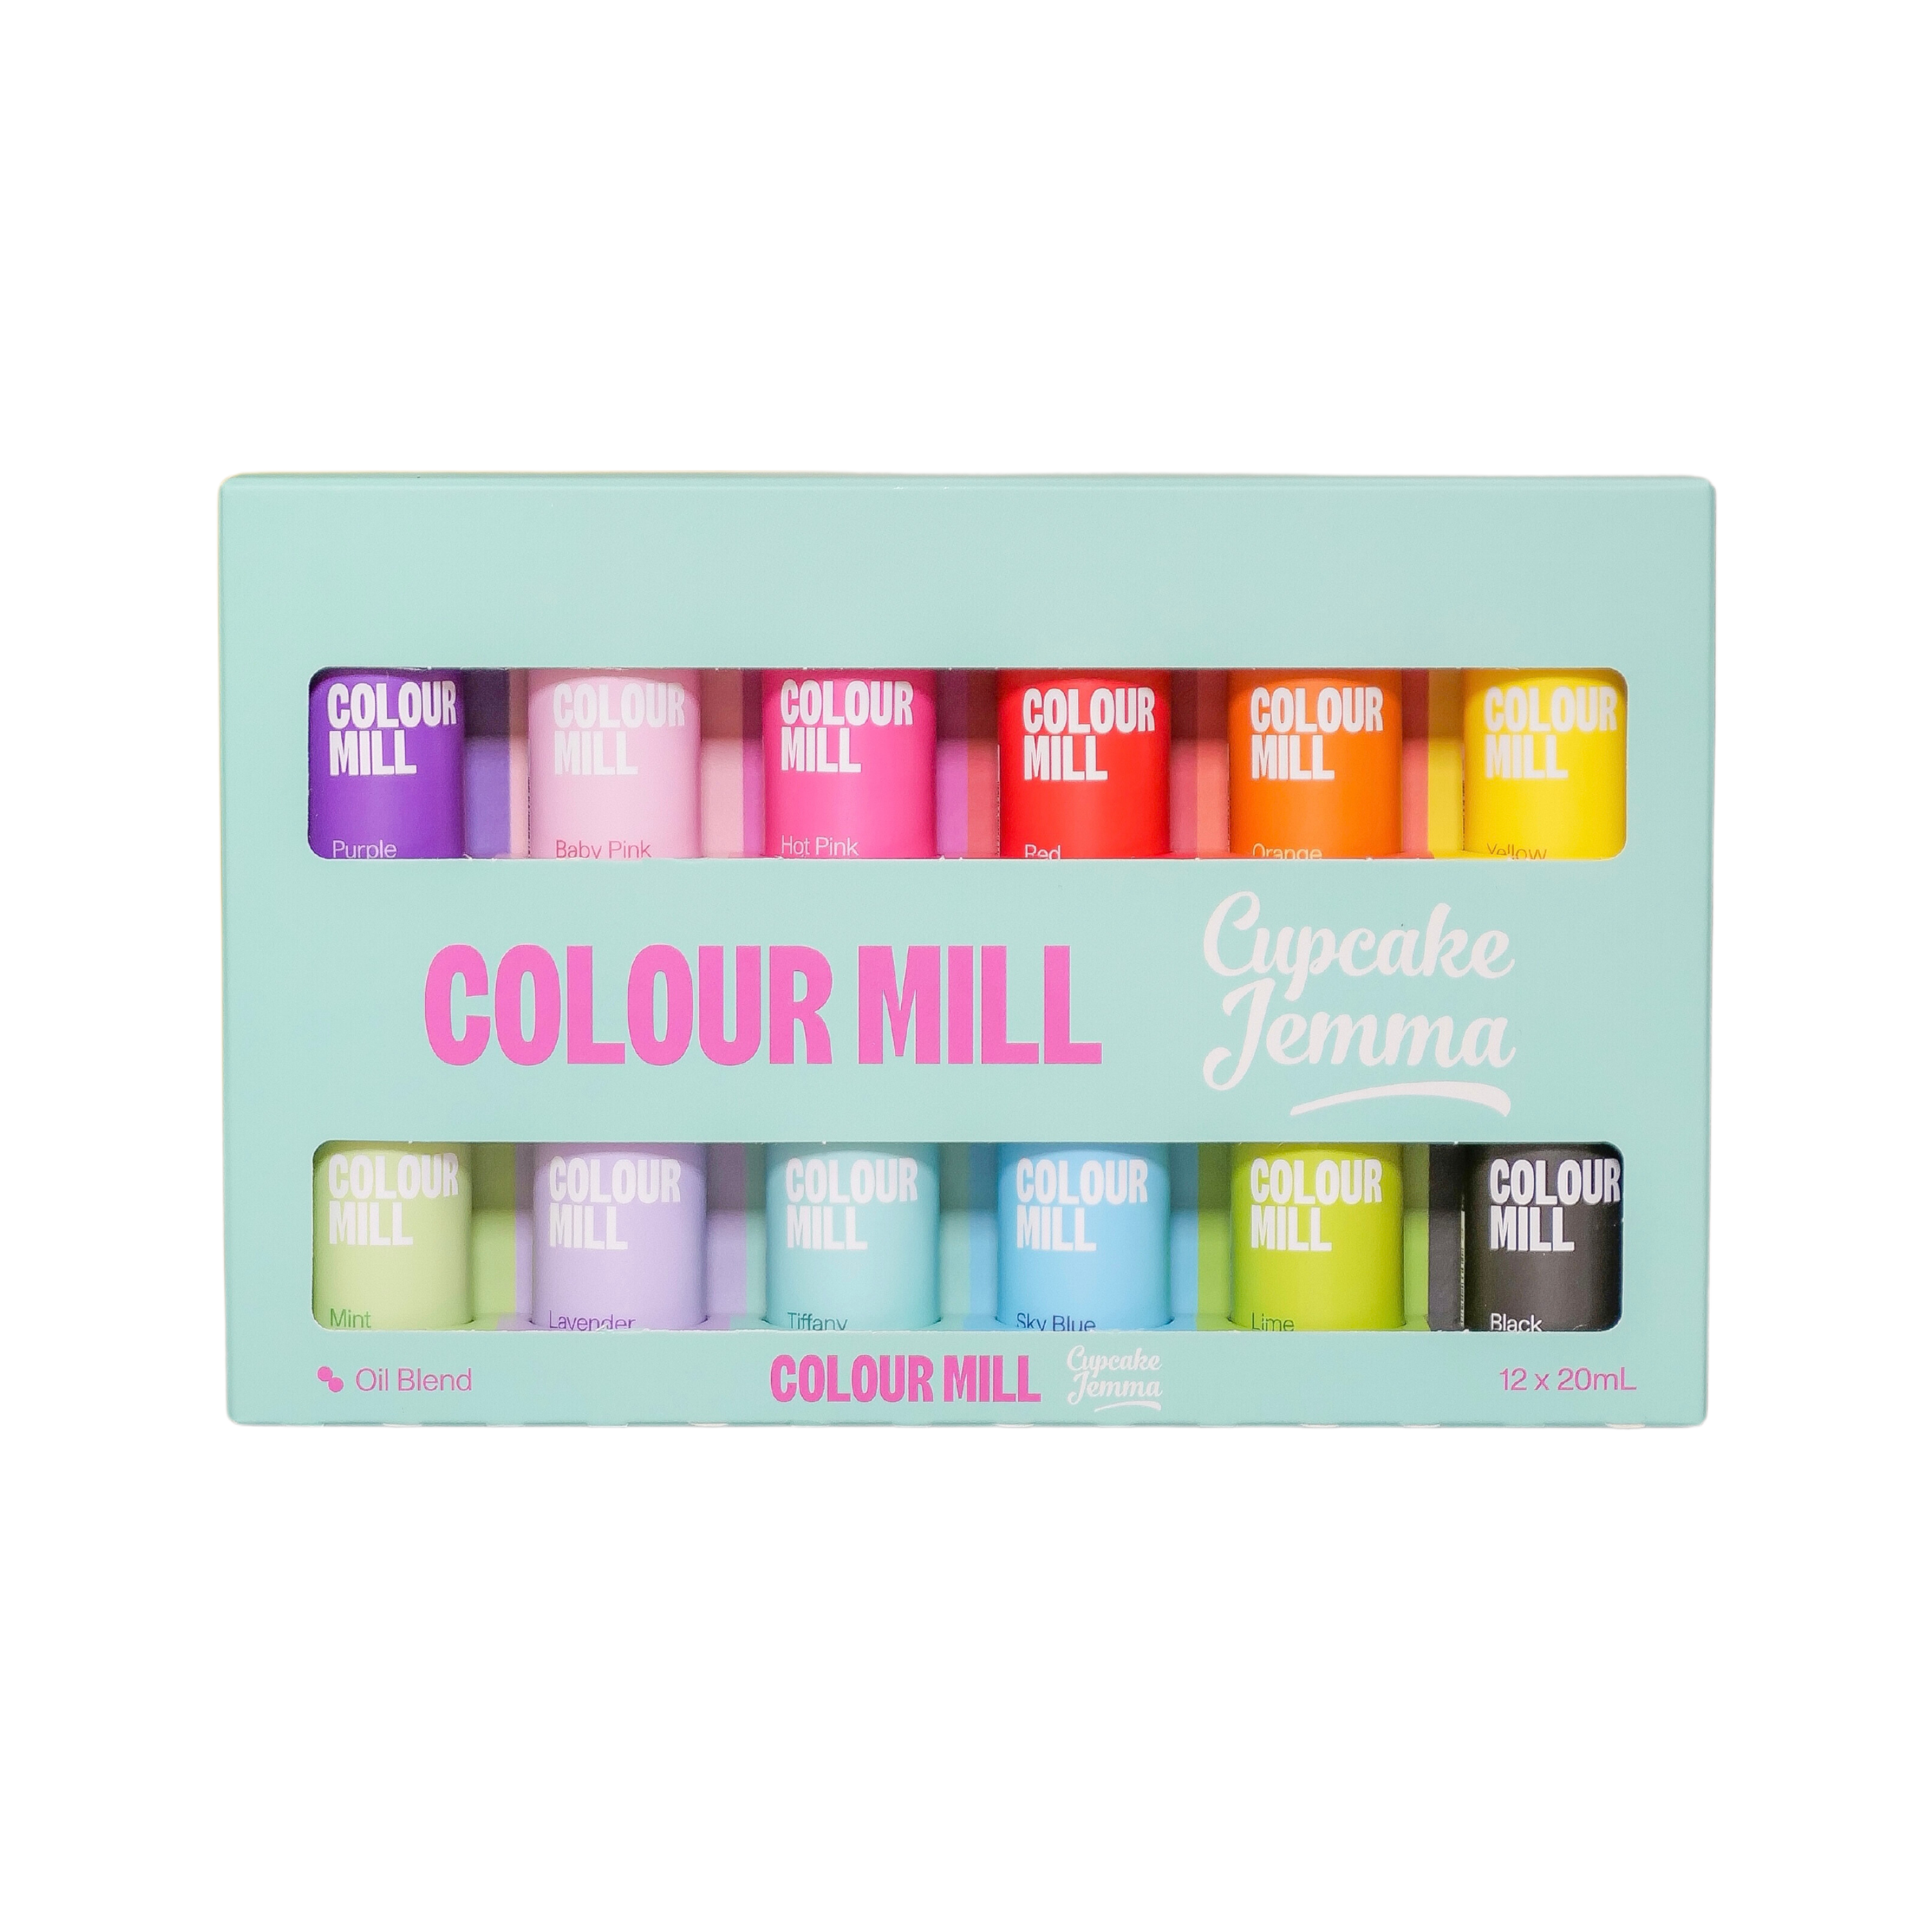 EU Cupcake Jemma x Colour Mill Packproduct image